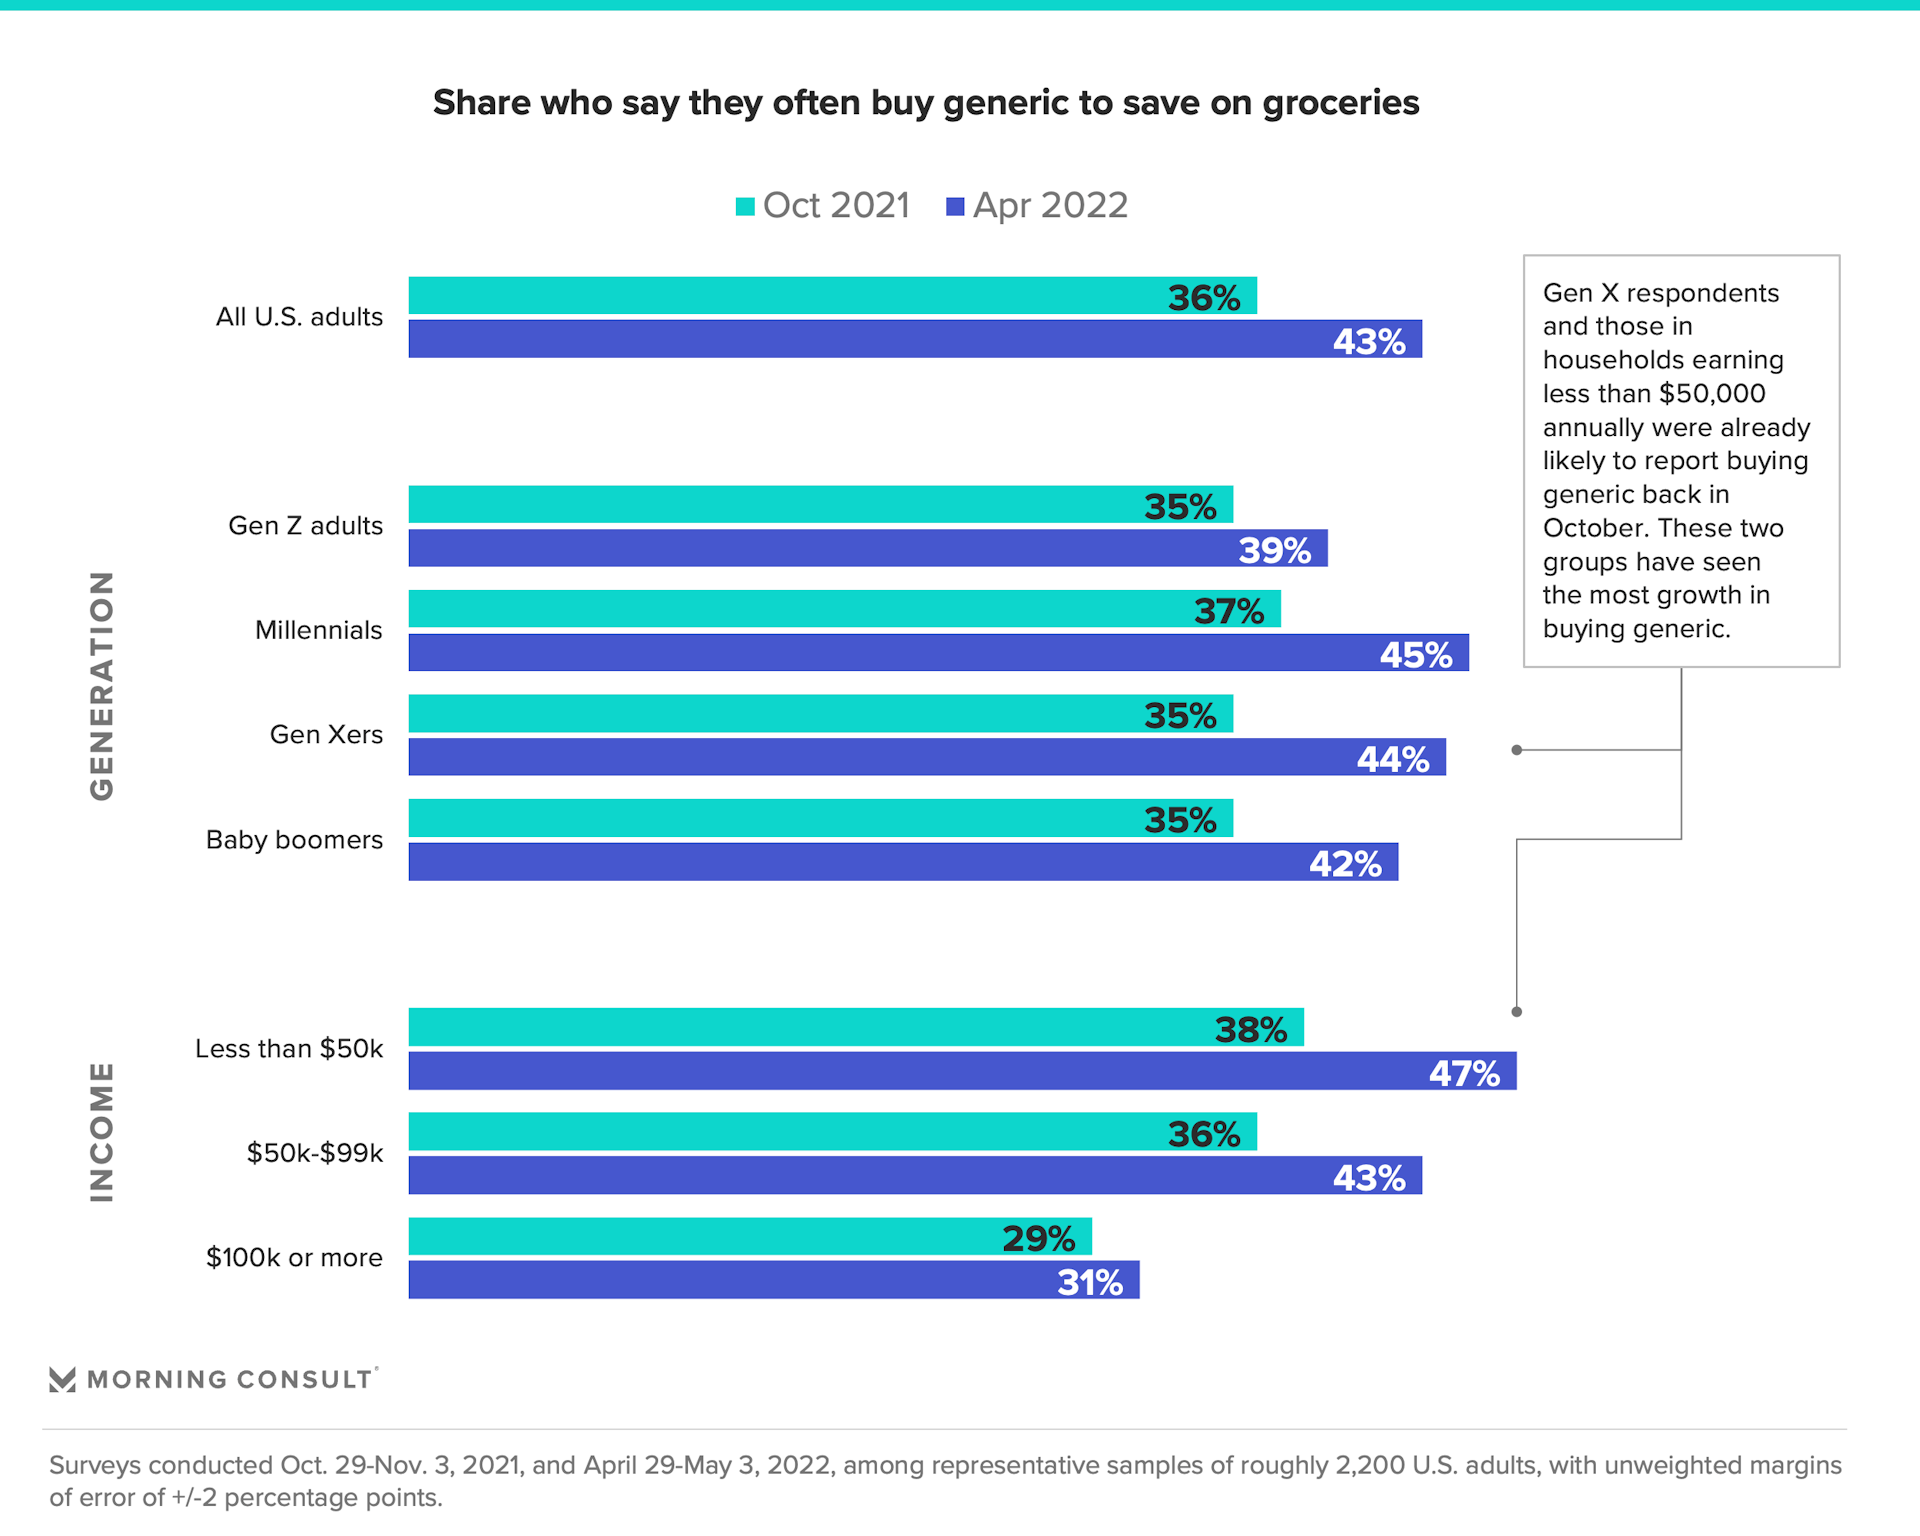 Bar charts depicting share of U.S. adults who buy generic when grocery shopping by generation and by income